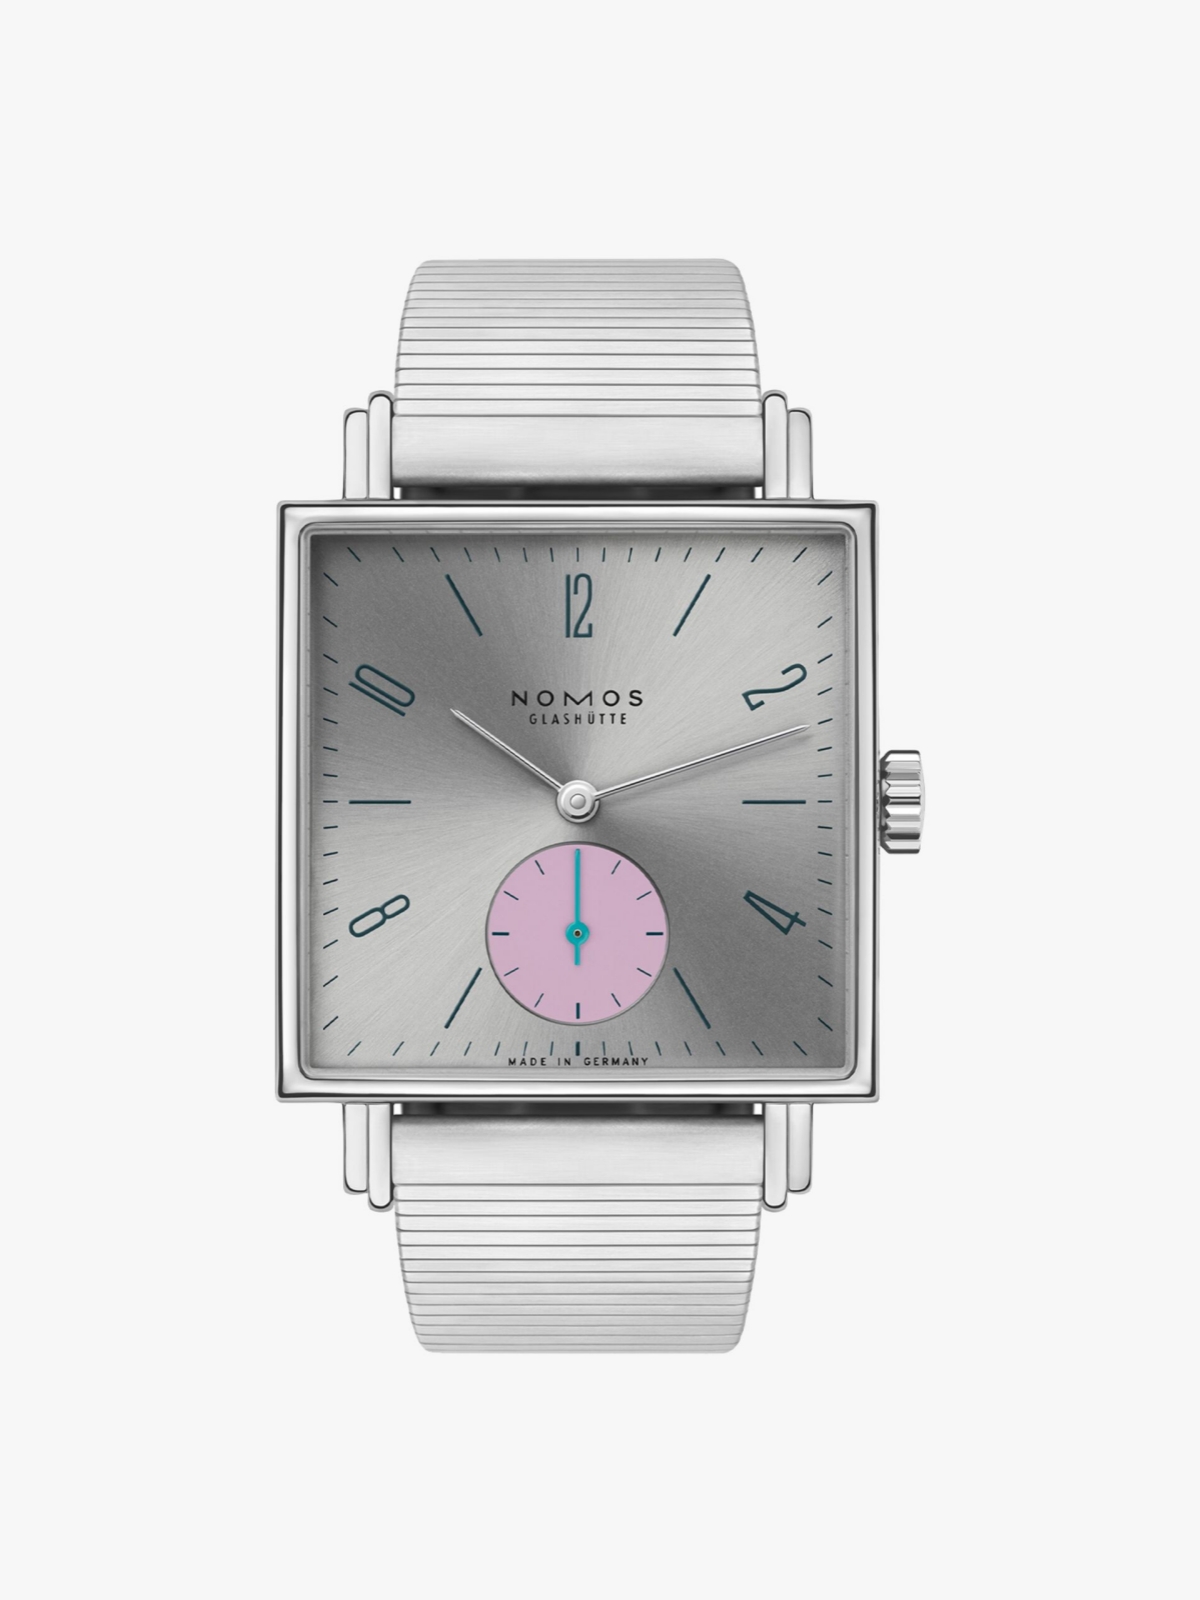 square watches